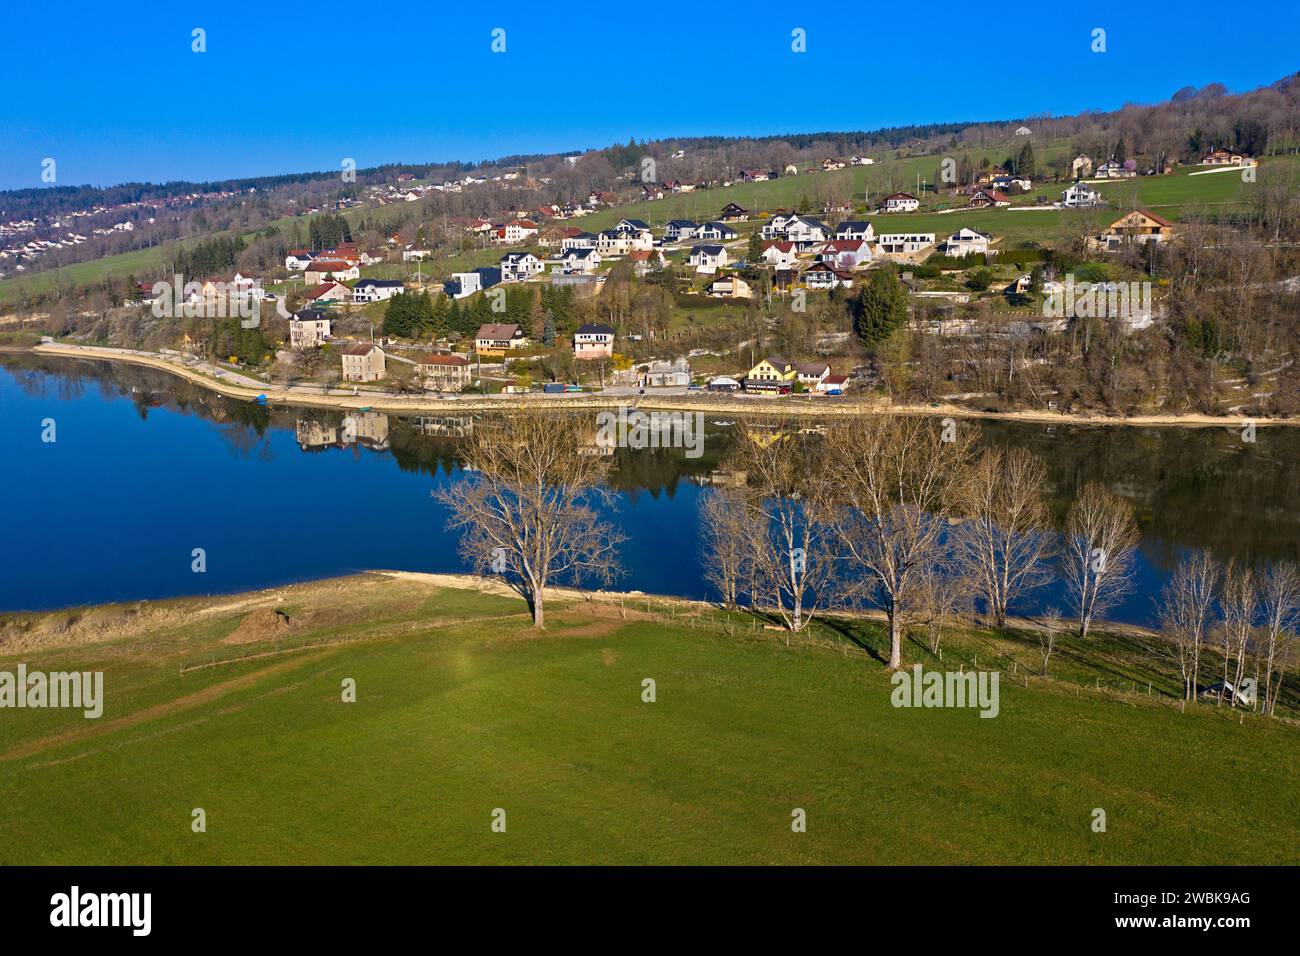 The hamlet of Chaillexon in the French commune of Villers-le-Lac on the banks of the border river Doubs, Département Doubs, France Stock Photo